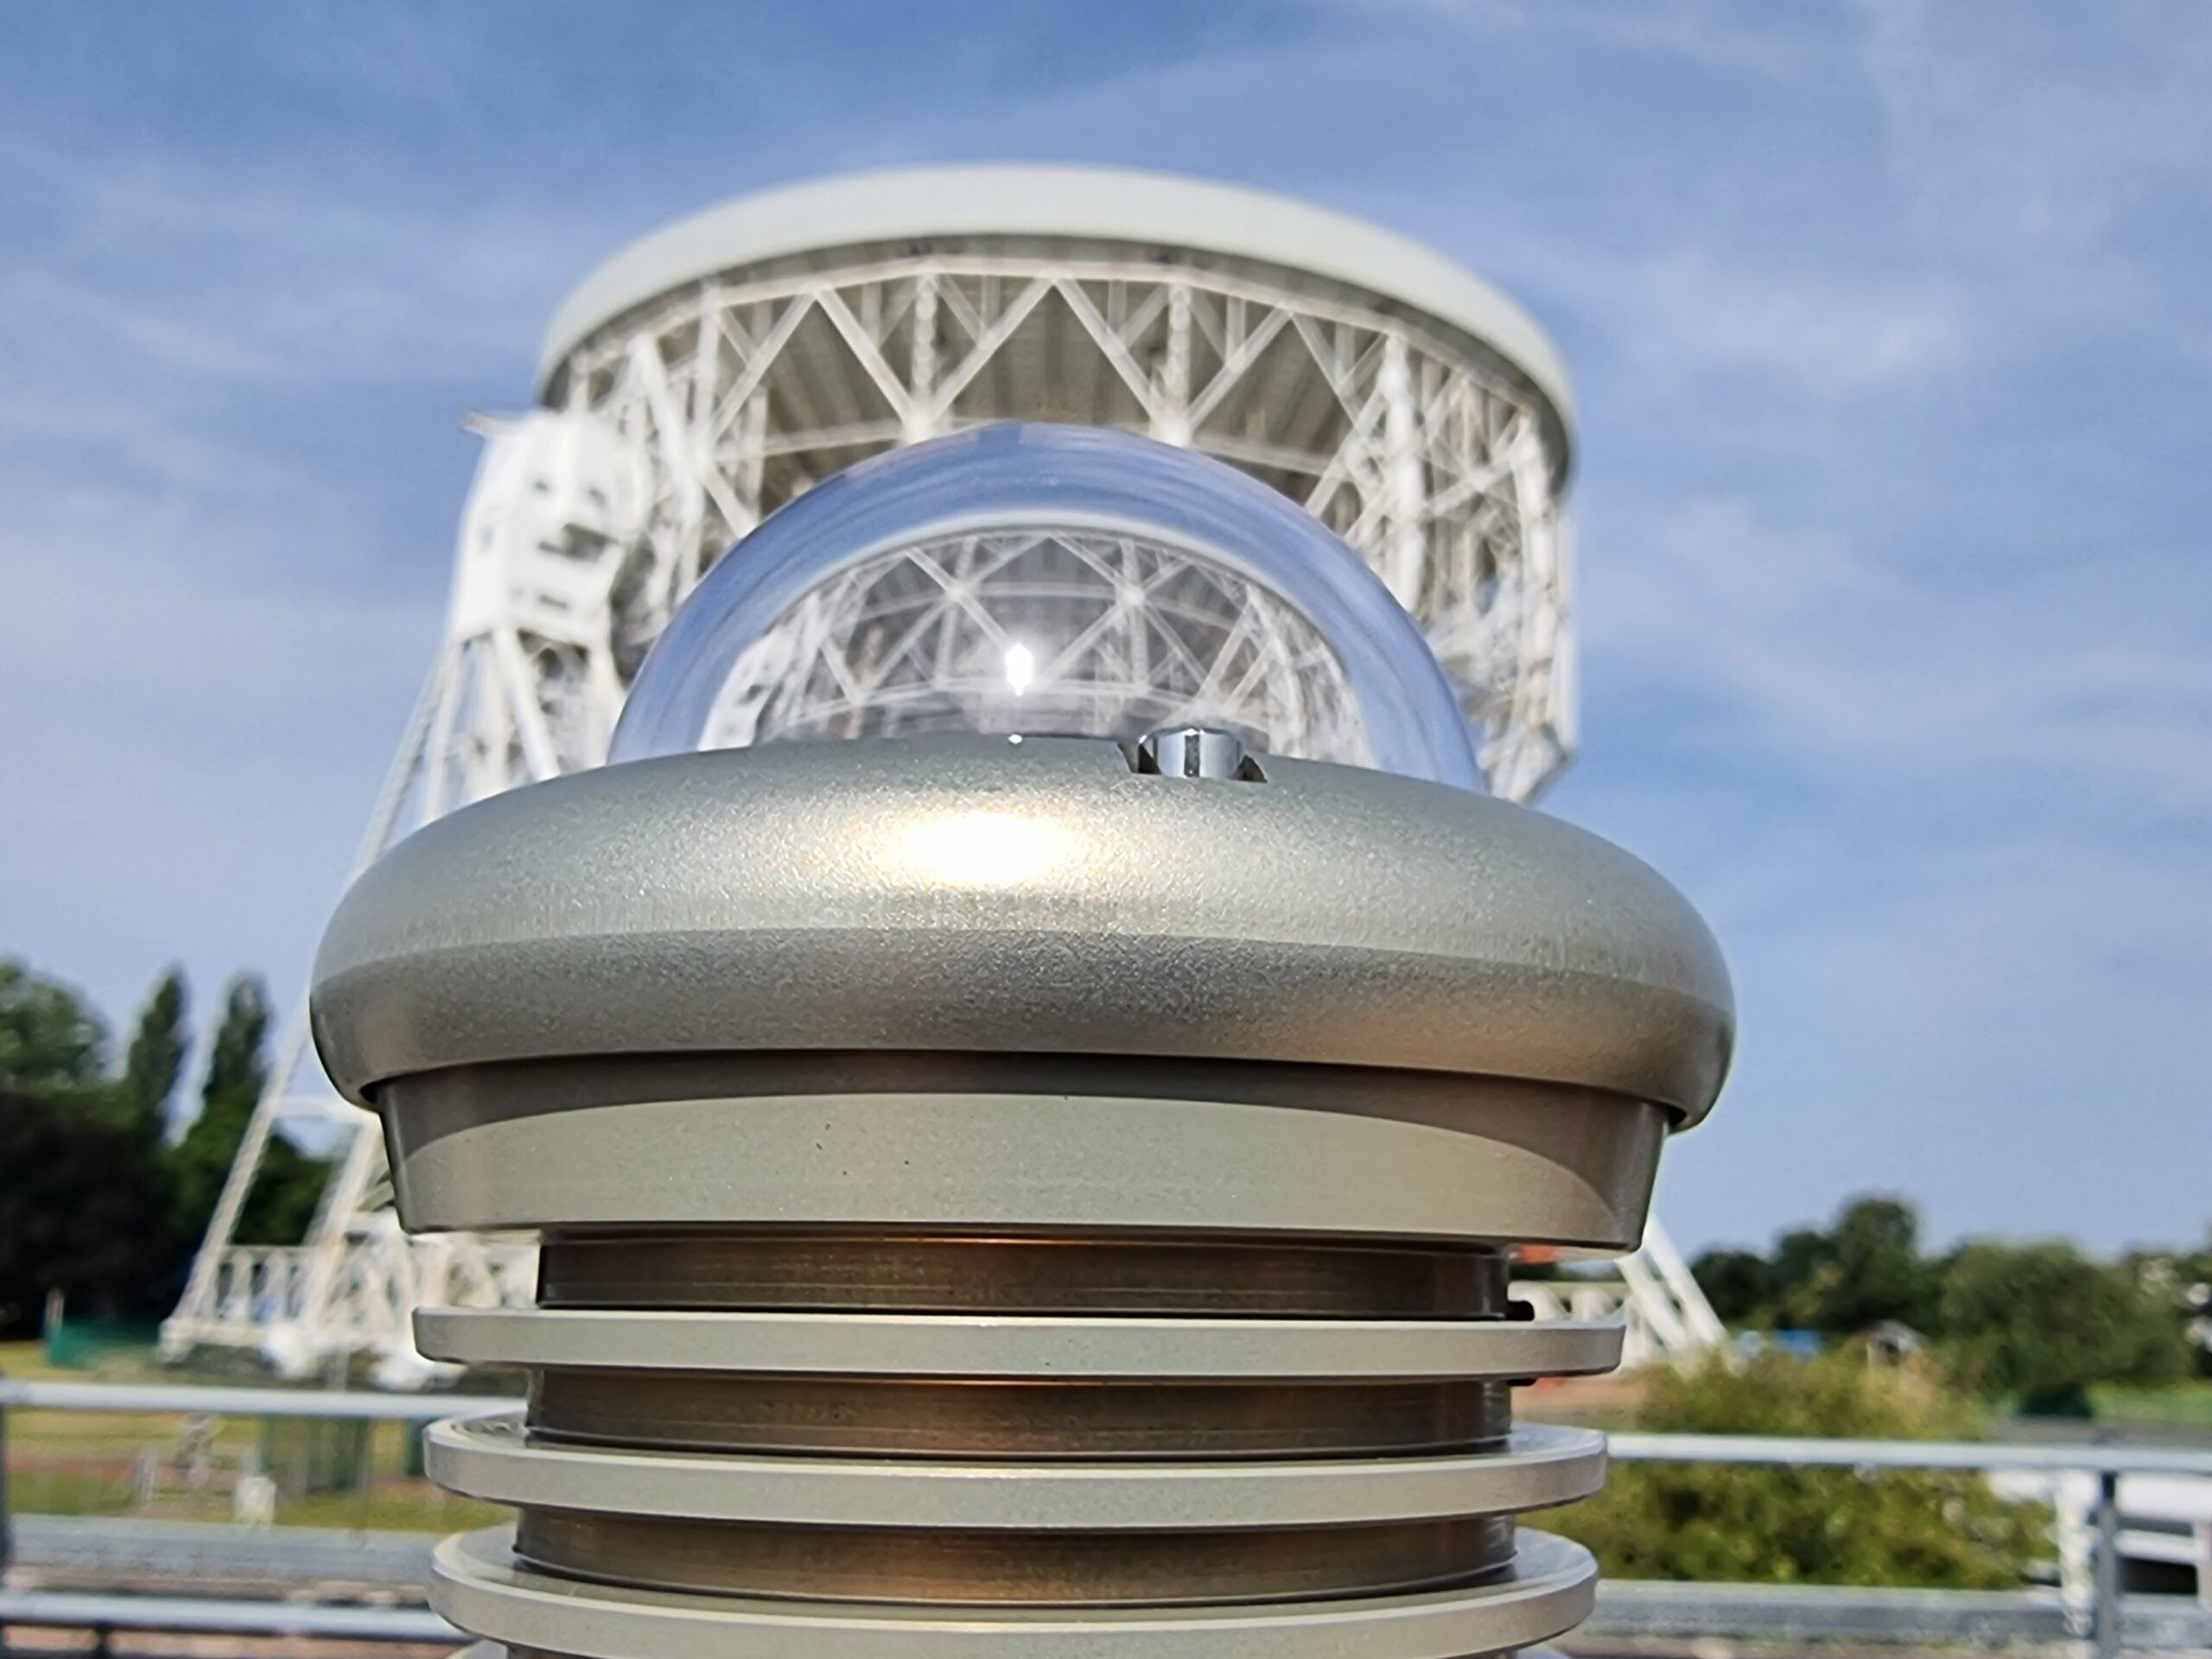 View of the Lovell Telescop at Jodrell Bank behind (and through the transparent protective dome of) the all-sky camera. 